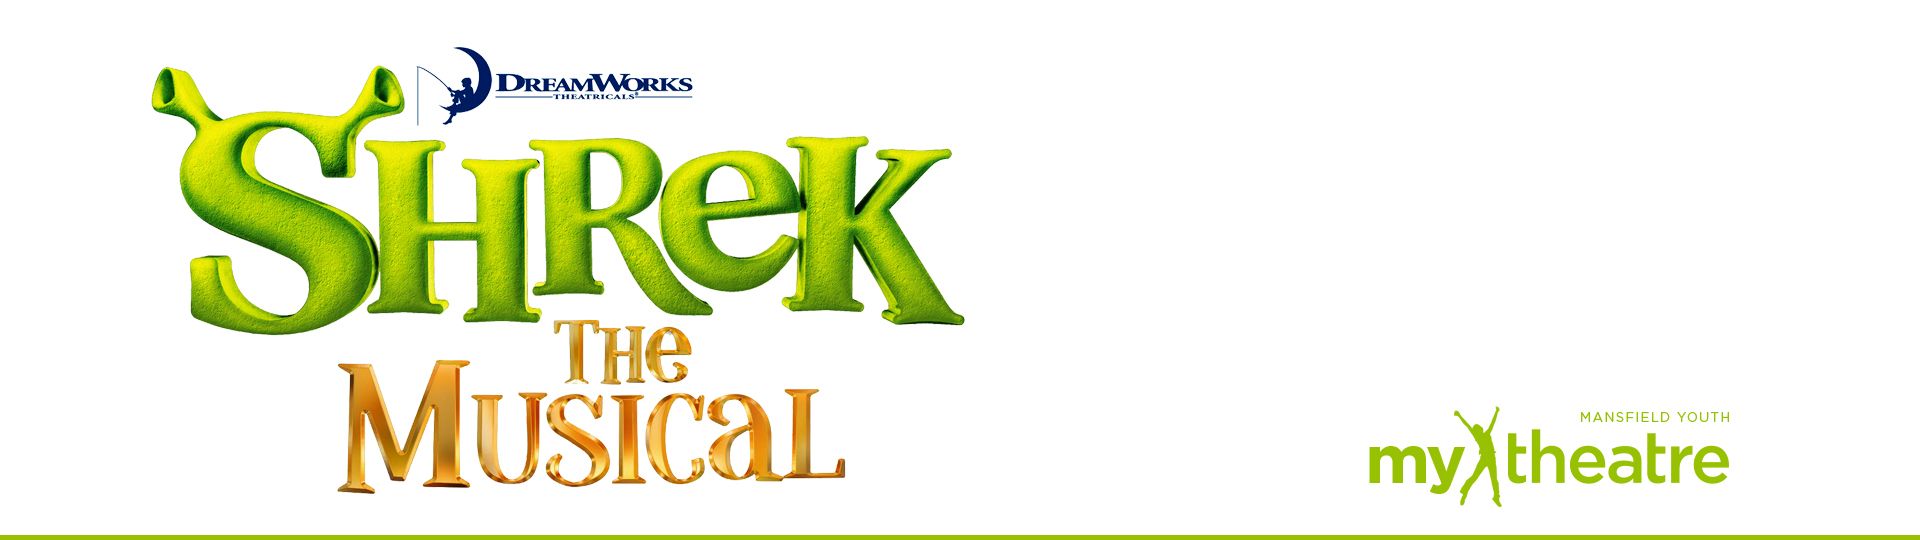 Mansfield Youth Theatre Shrek The Musical Destination Mansfield